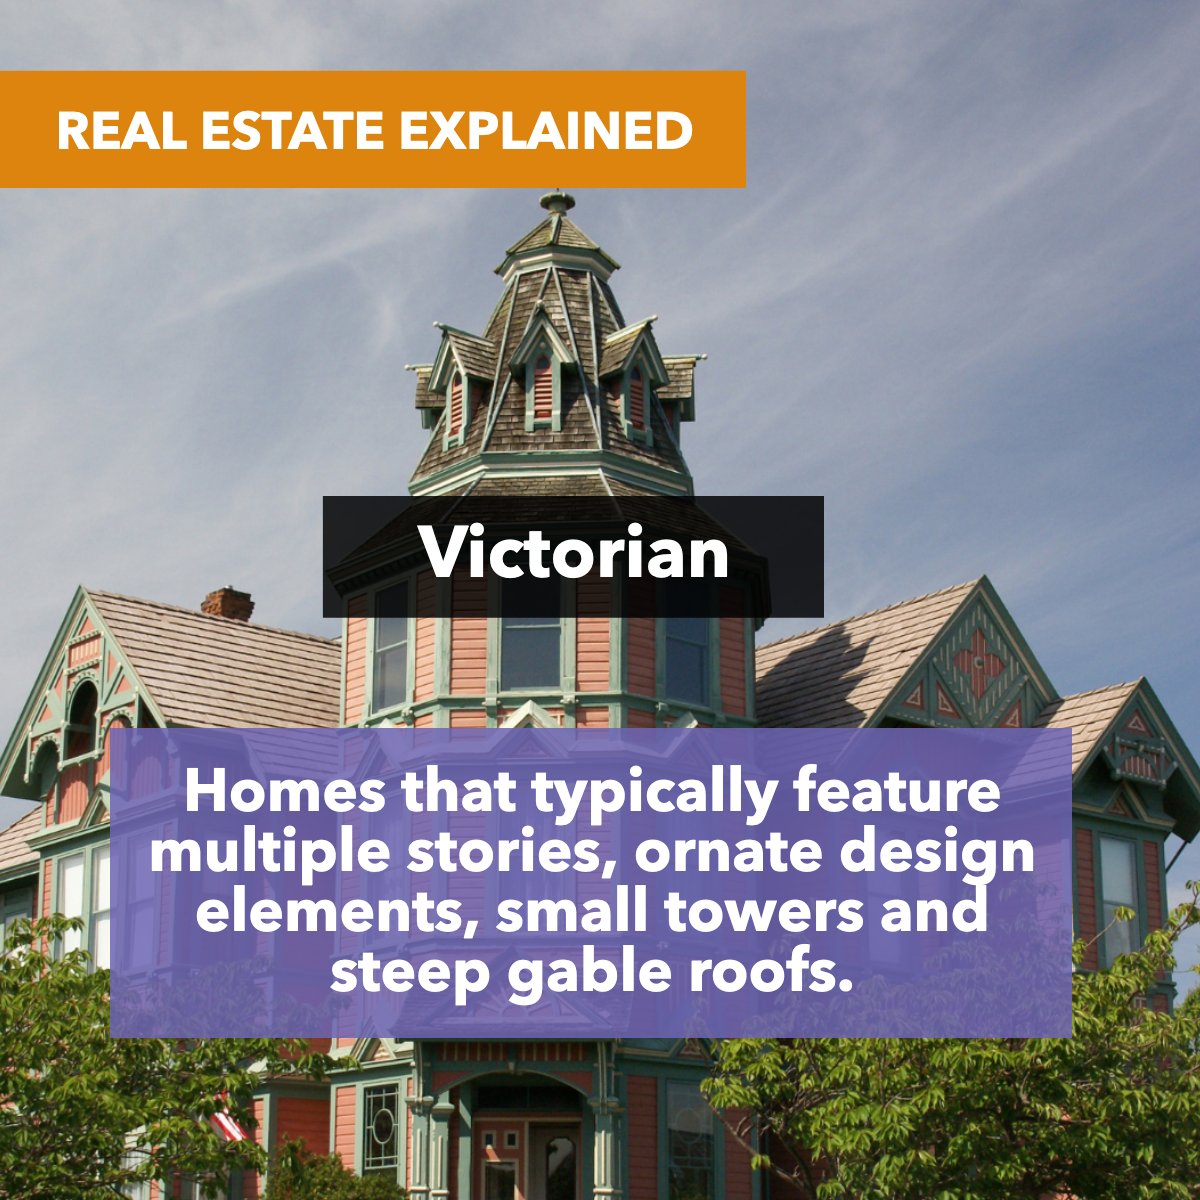 Did you know what a Victorian House is? 🤔

Is this the type of house that you like?

#victorianhouse #realestate #facts #realfacts
 #lasvegasrealtor #lasvegasrealestate #sparrowsells #lasvegashomes #realestate #vegasbaby #realtorlife #speaknsparrow #justsold